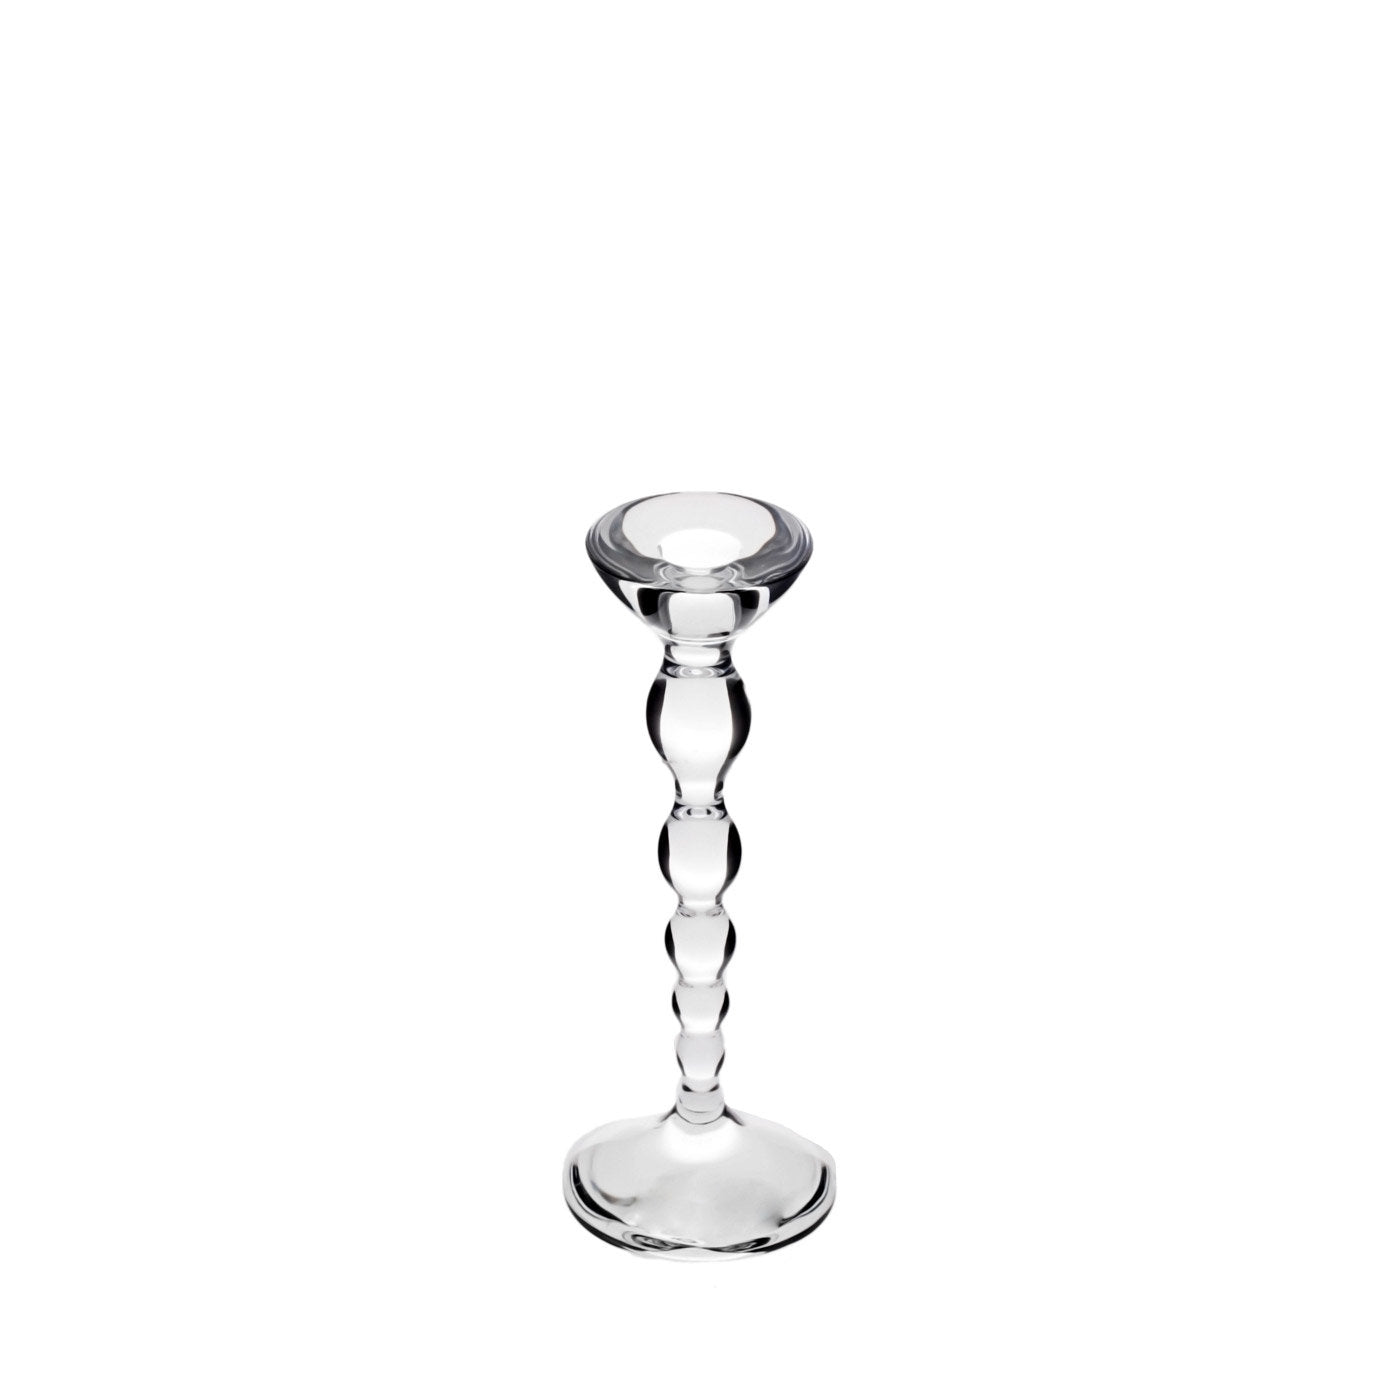 Collier Crystal Low Candle Holder - Alternative view 1